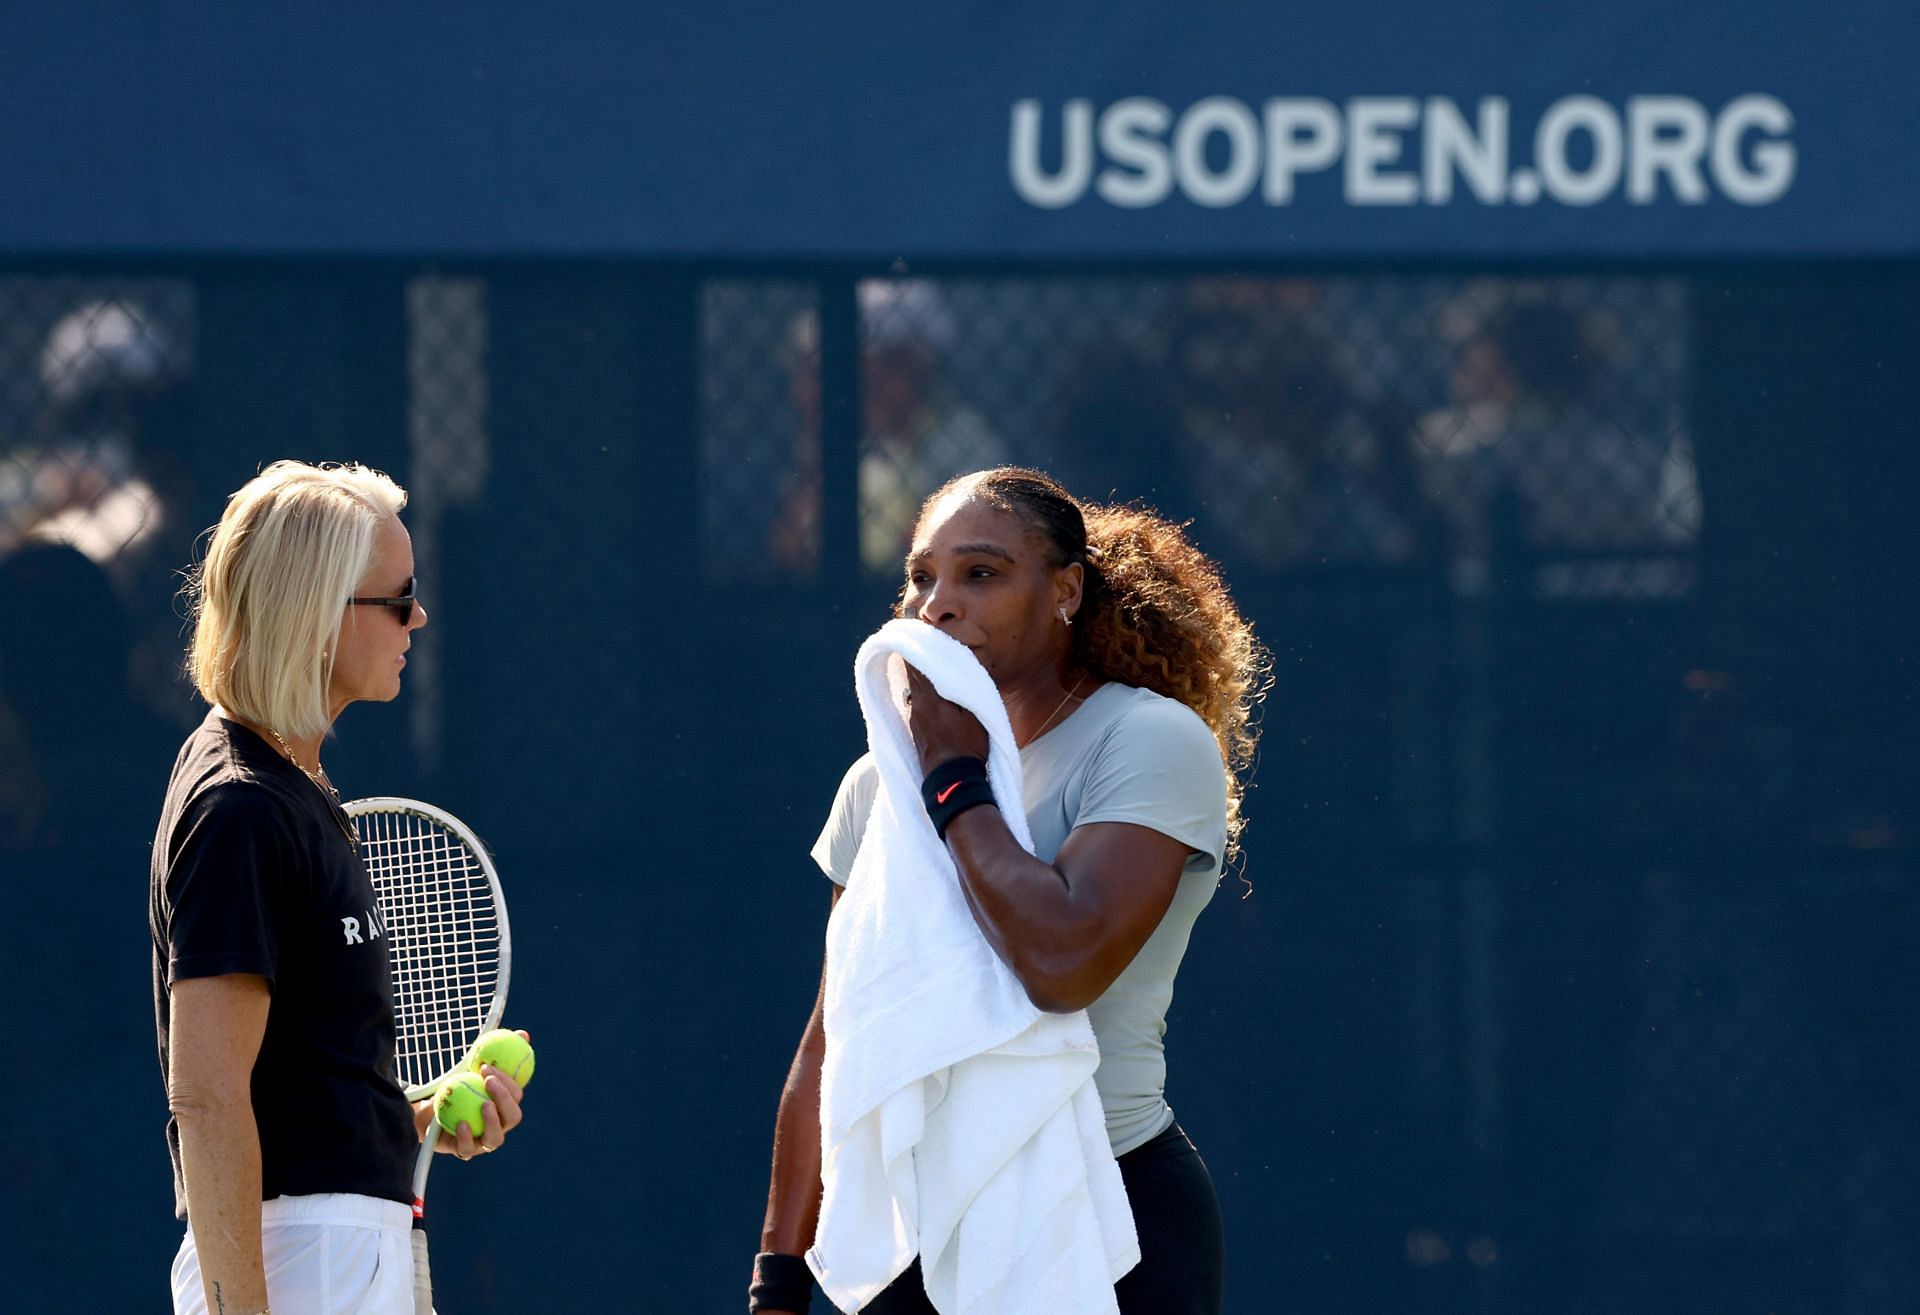 Rennae Stubbs talks to Serena Williams during a practice session in New York